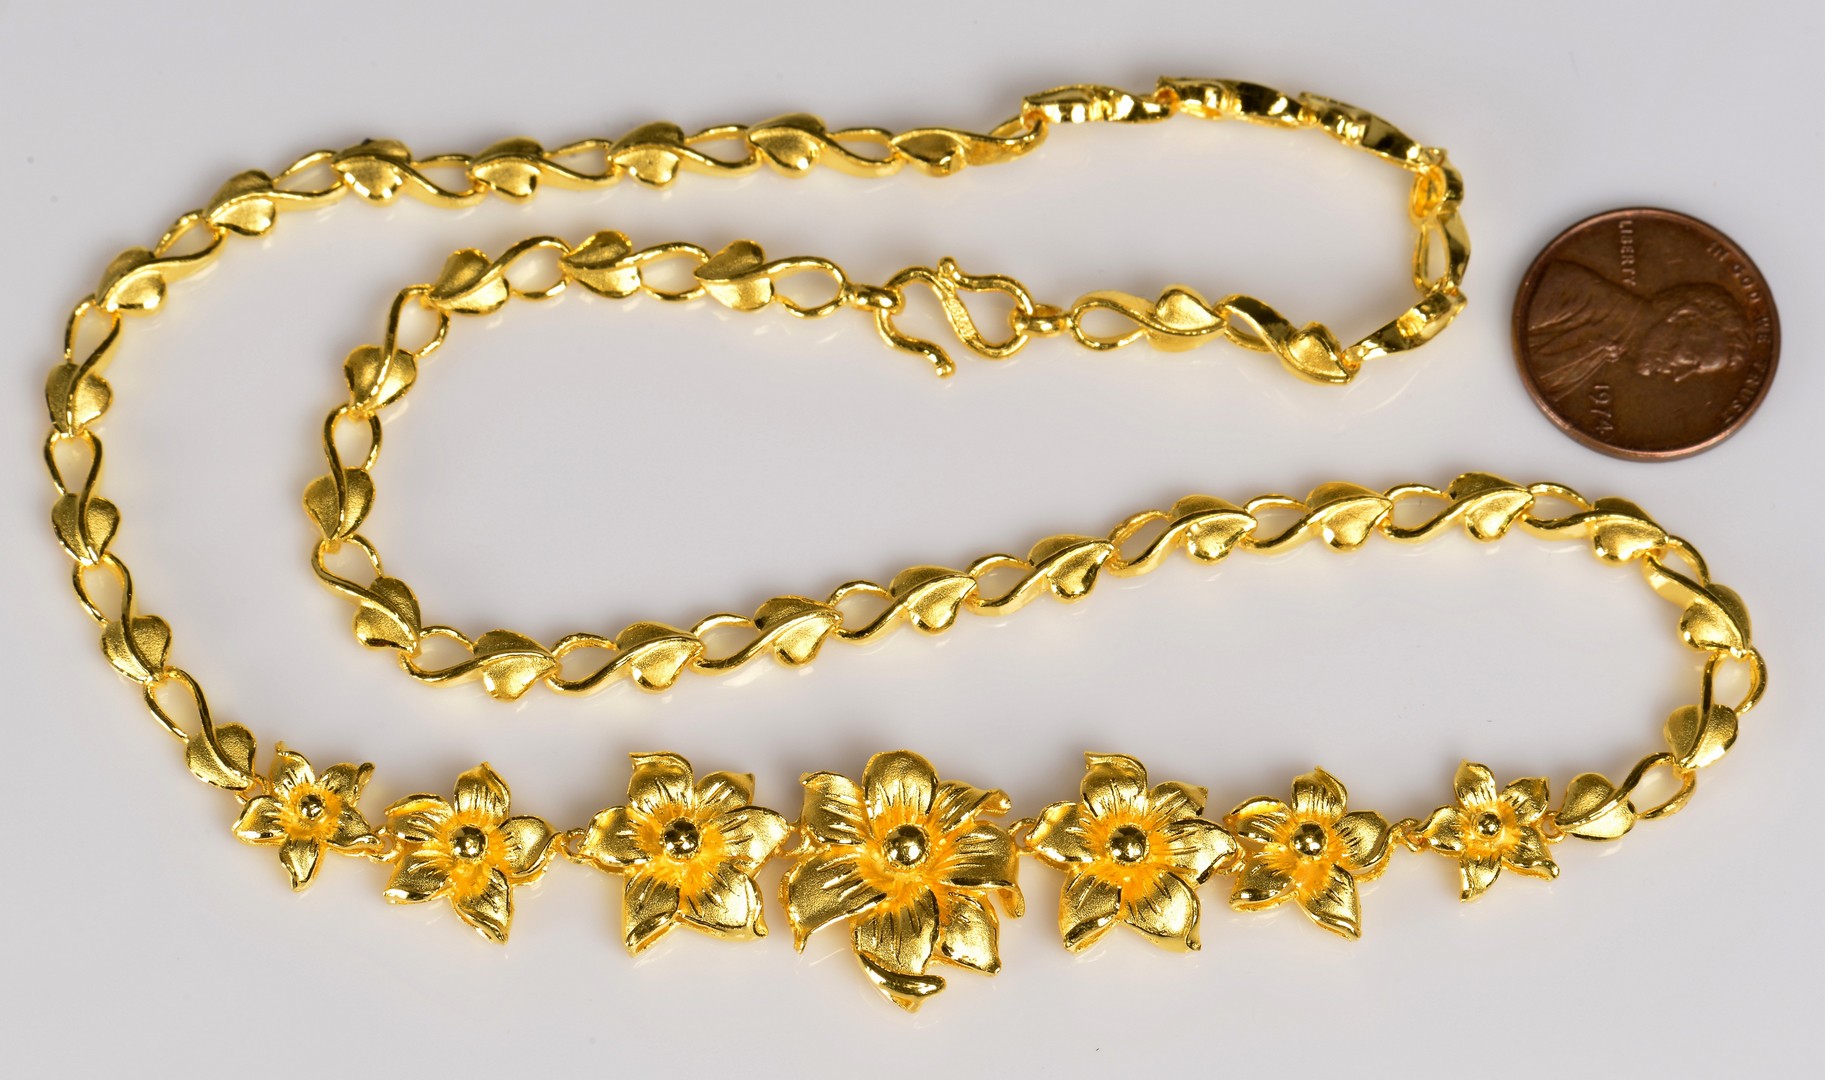 Lot 65: 24K Chinese Necklace, 40.6 grams